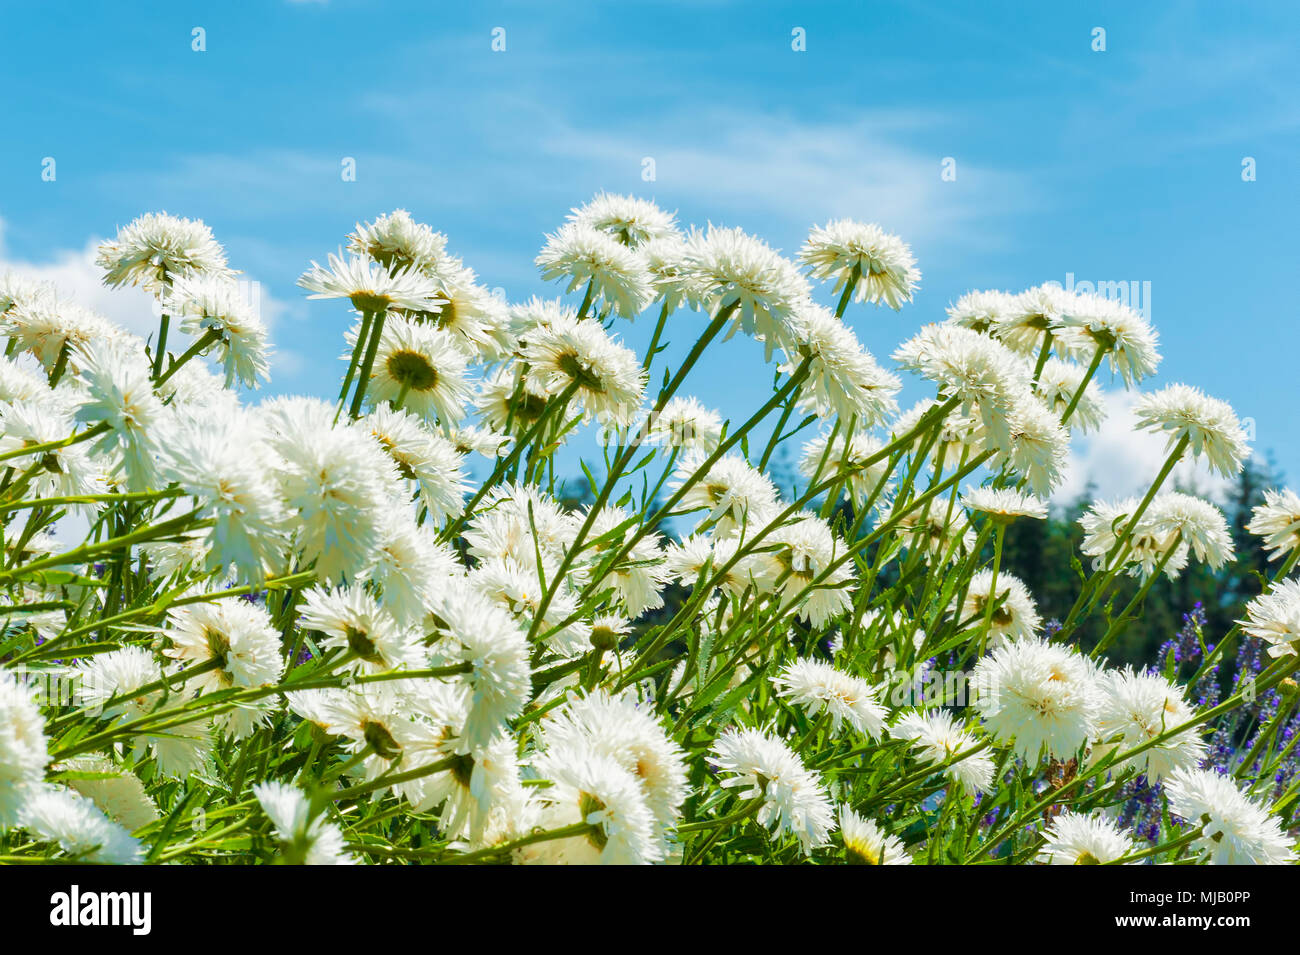 A cluster of white shasta daisies agains a blue sky and whispy clouds Stock Photo